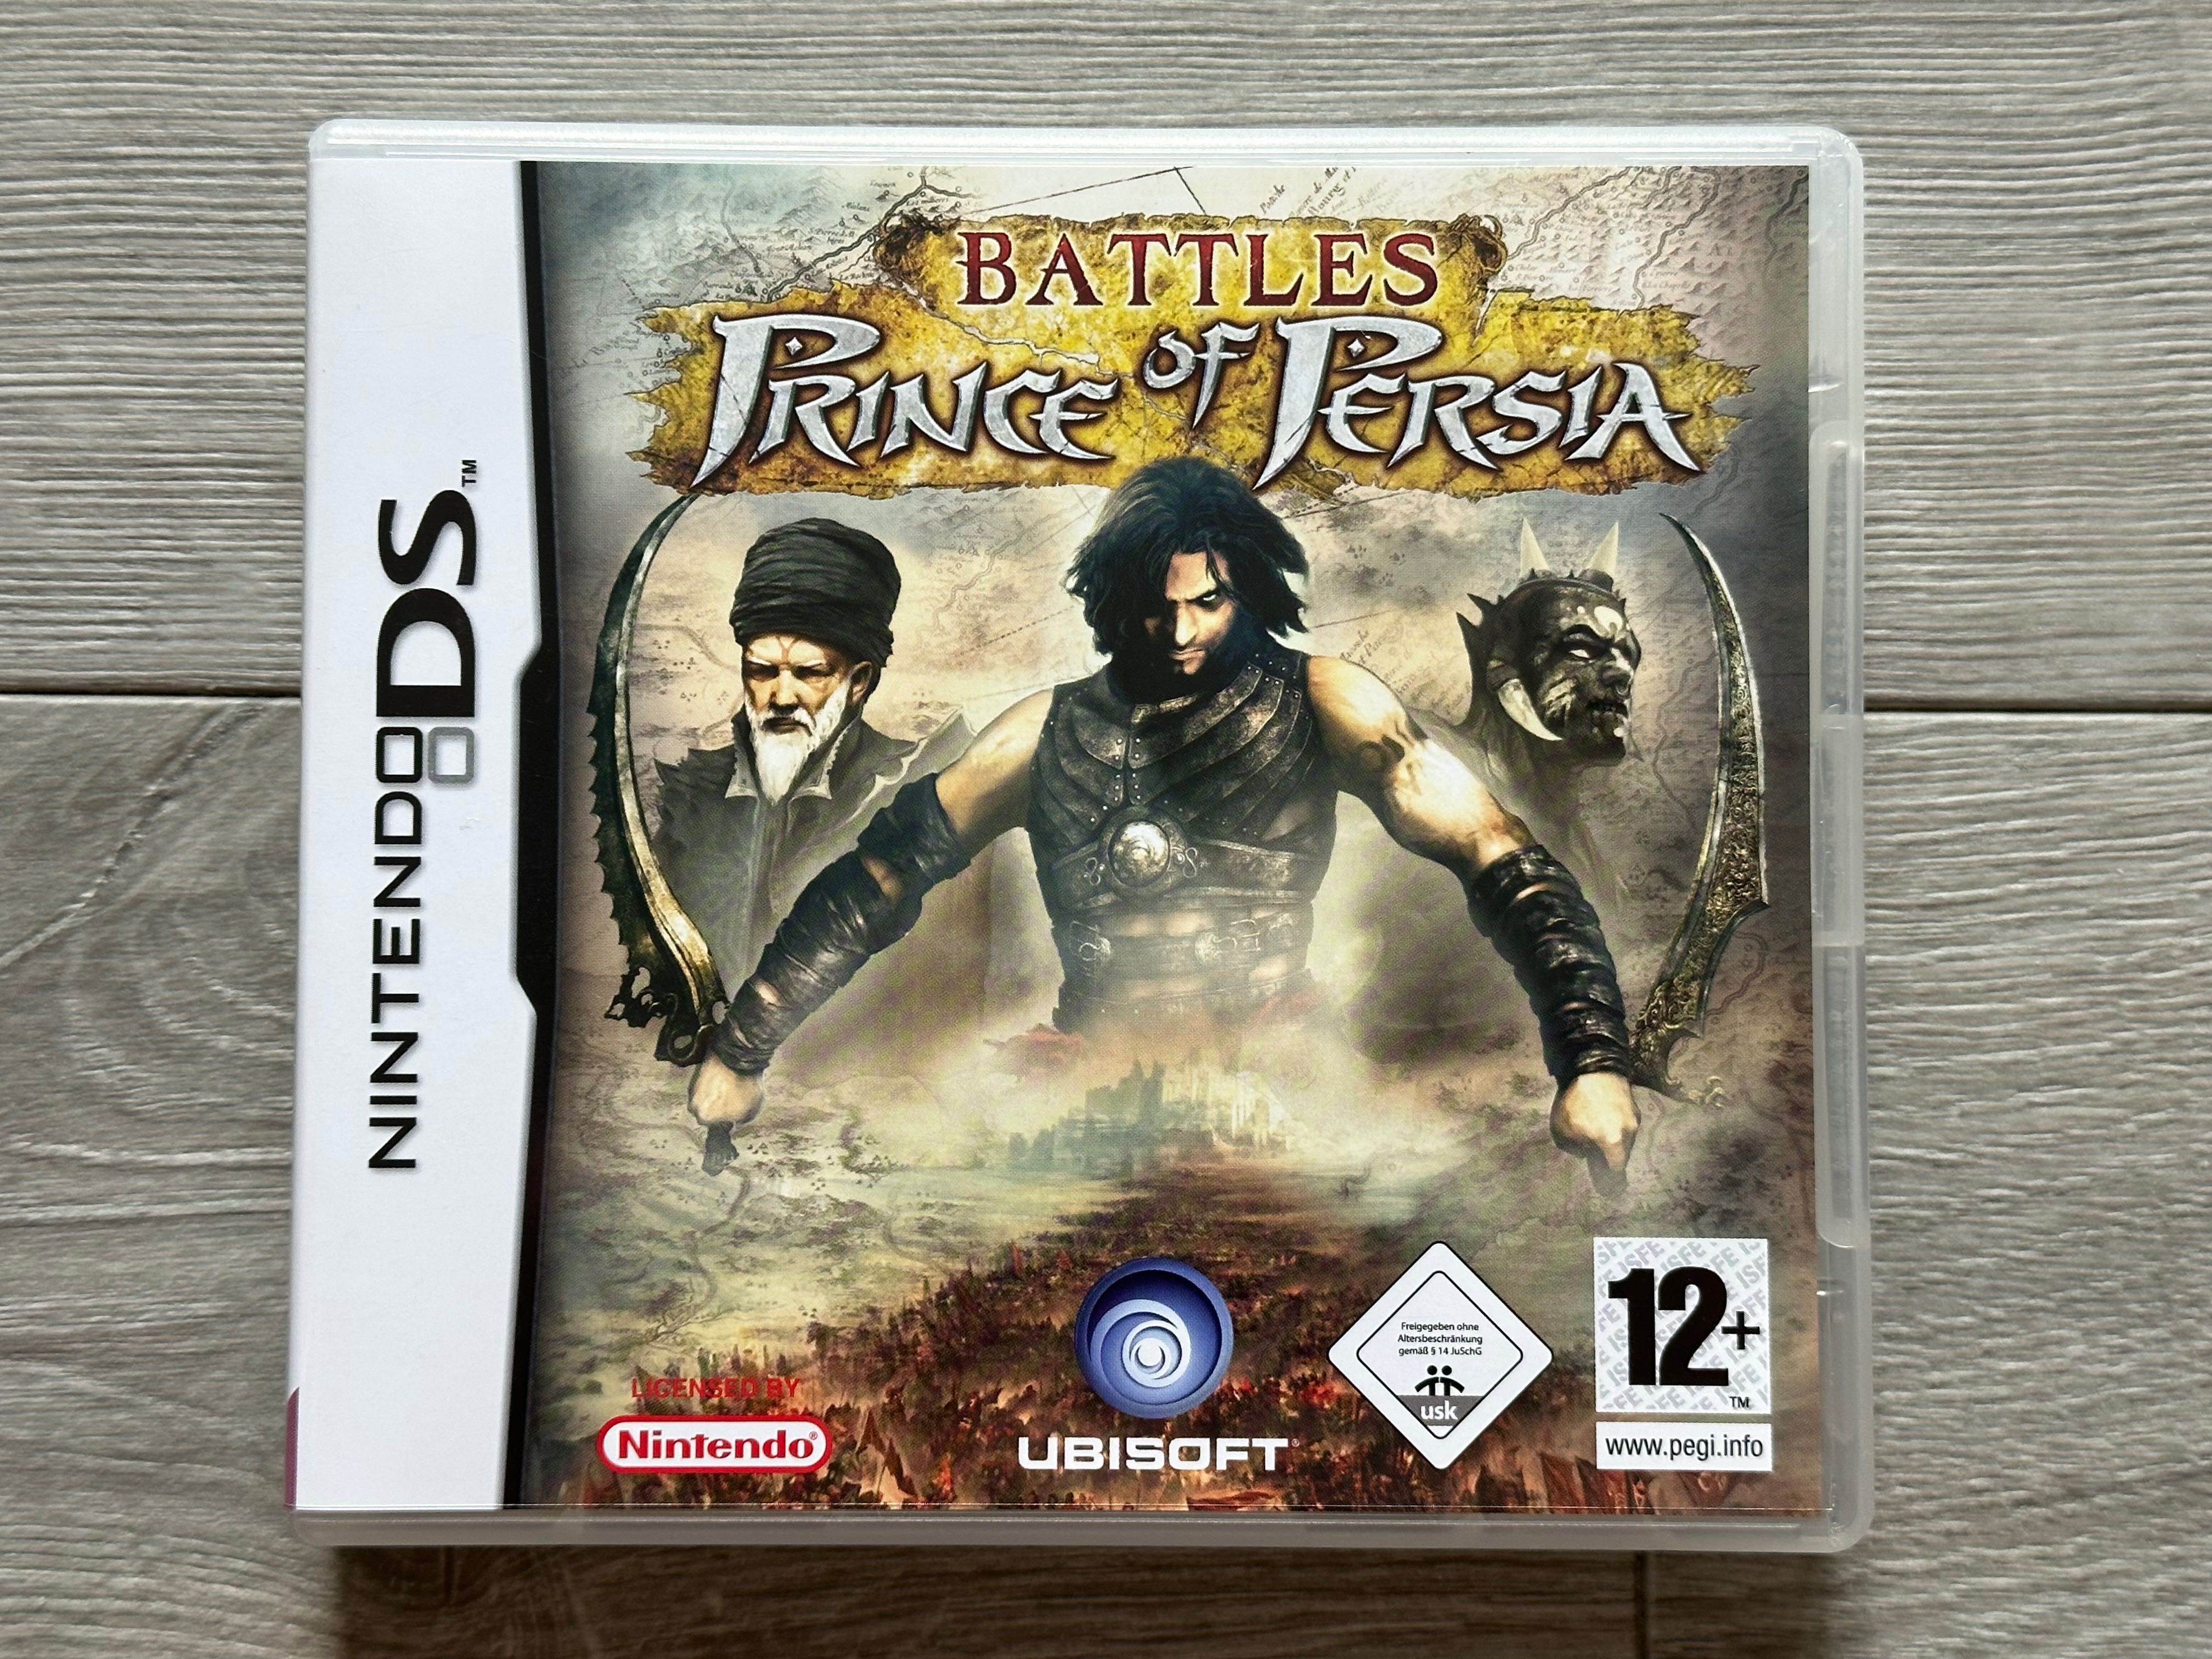 Battles of Prince of Persia / Nintendo DS